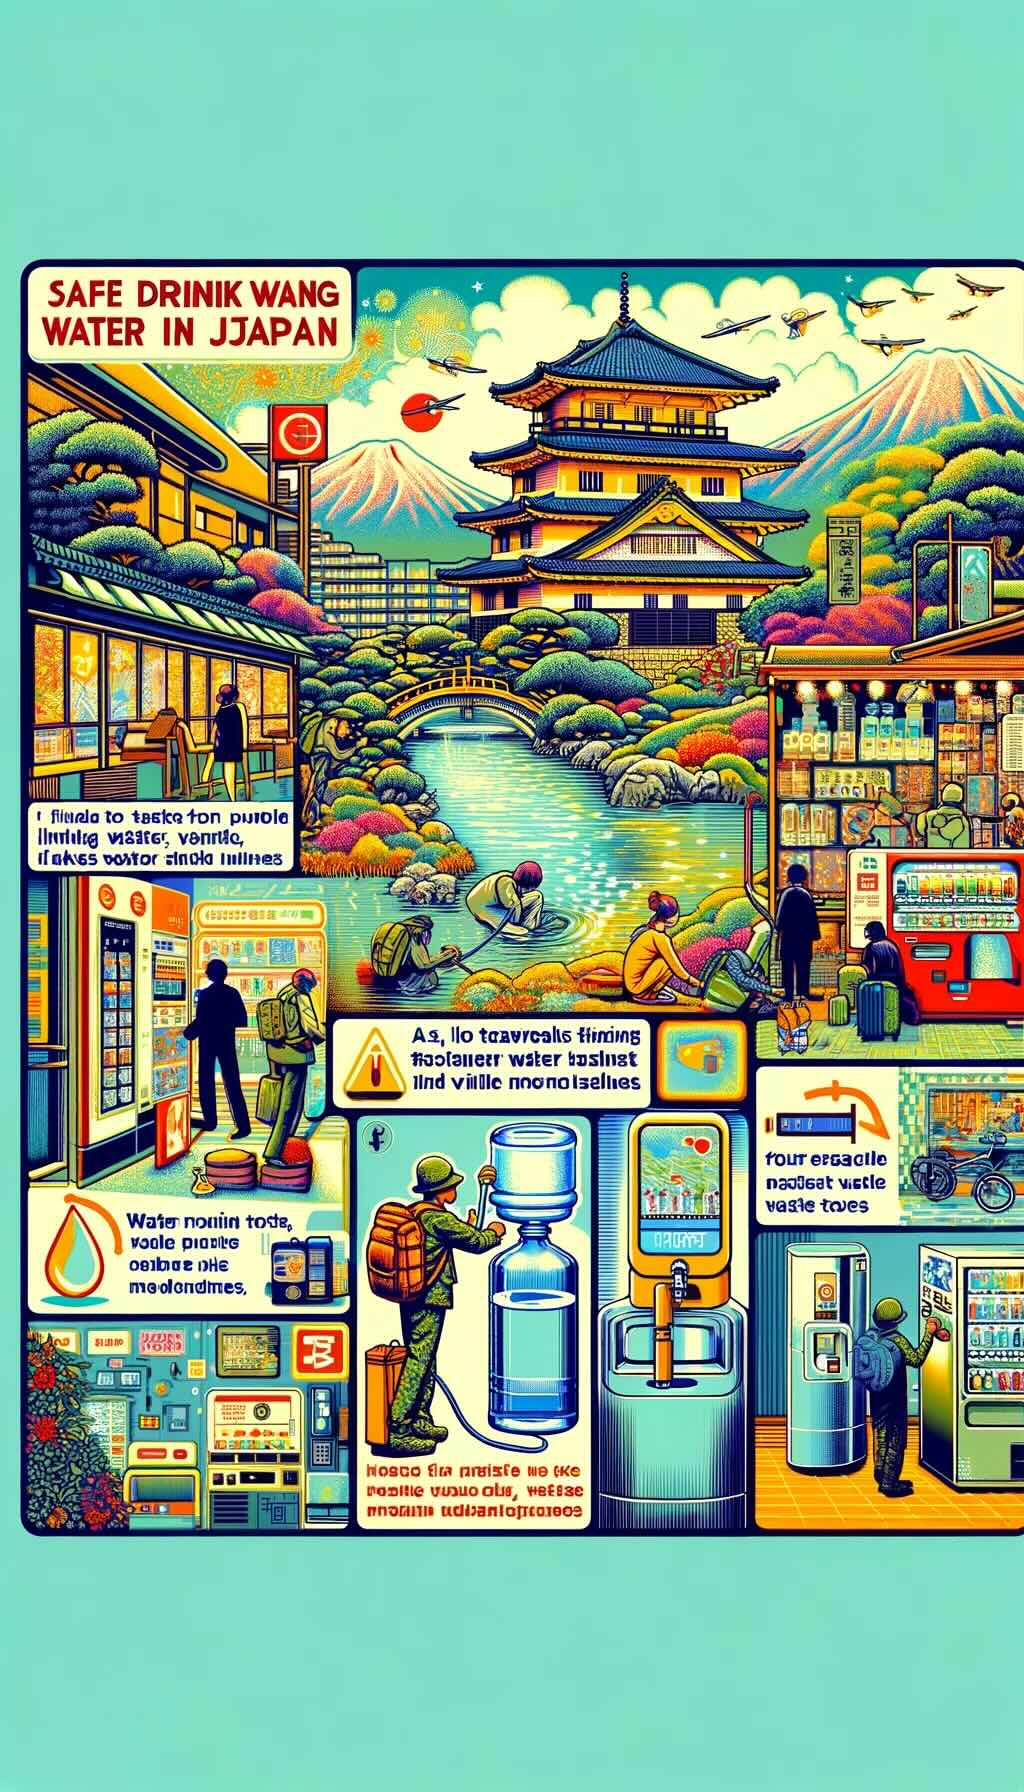 Practical tips for tourists on locating safe drinking water sources in Japan depicts travelers finding potable water in hotels, restaurants, public facilities, and vending machines illustrates the use of water purification tools for those venturing into remote areas and emphasizes the importance of staying hydrated, showing travelers with reusable water bottles exploring various Japanese settings conveys the message of safe hydration practices in Japan for tourists.